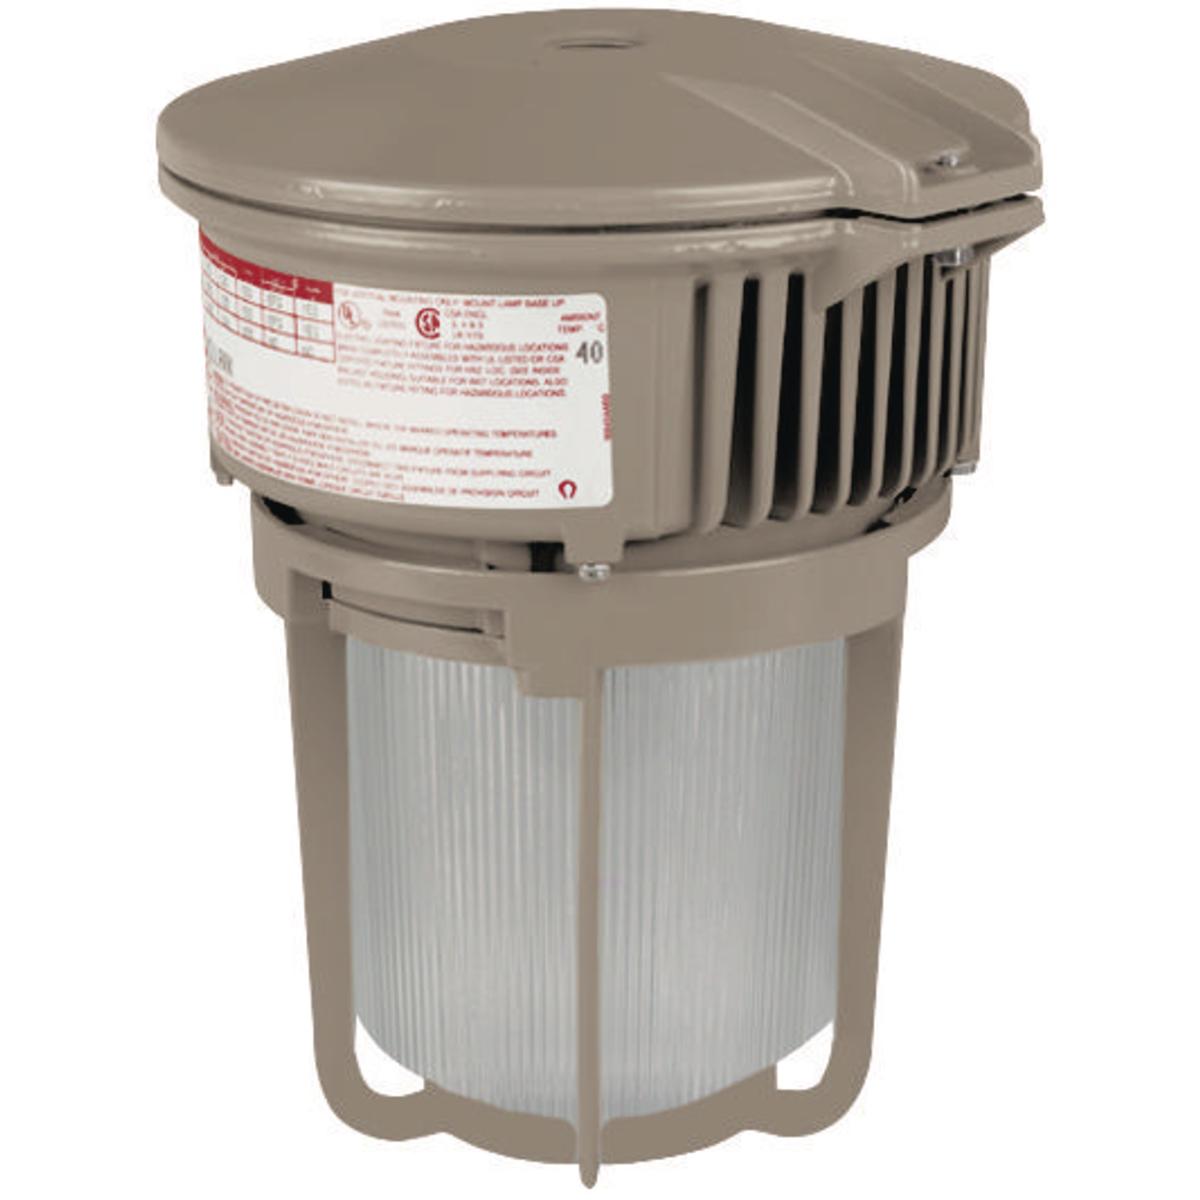 Hubbell MBL4530A2GLG The MBL Series is a compact low bay energy efficient LED. The design of the MBL makes it suitable for harsh and hazardous environments using a cast copper-free aluminum. Its low profile and compact design allow the MBL to fit in areas where larger fixture